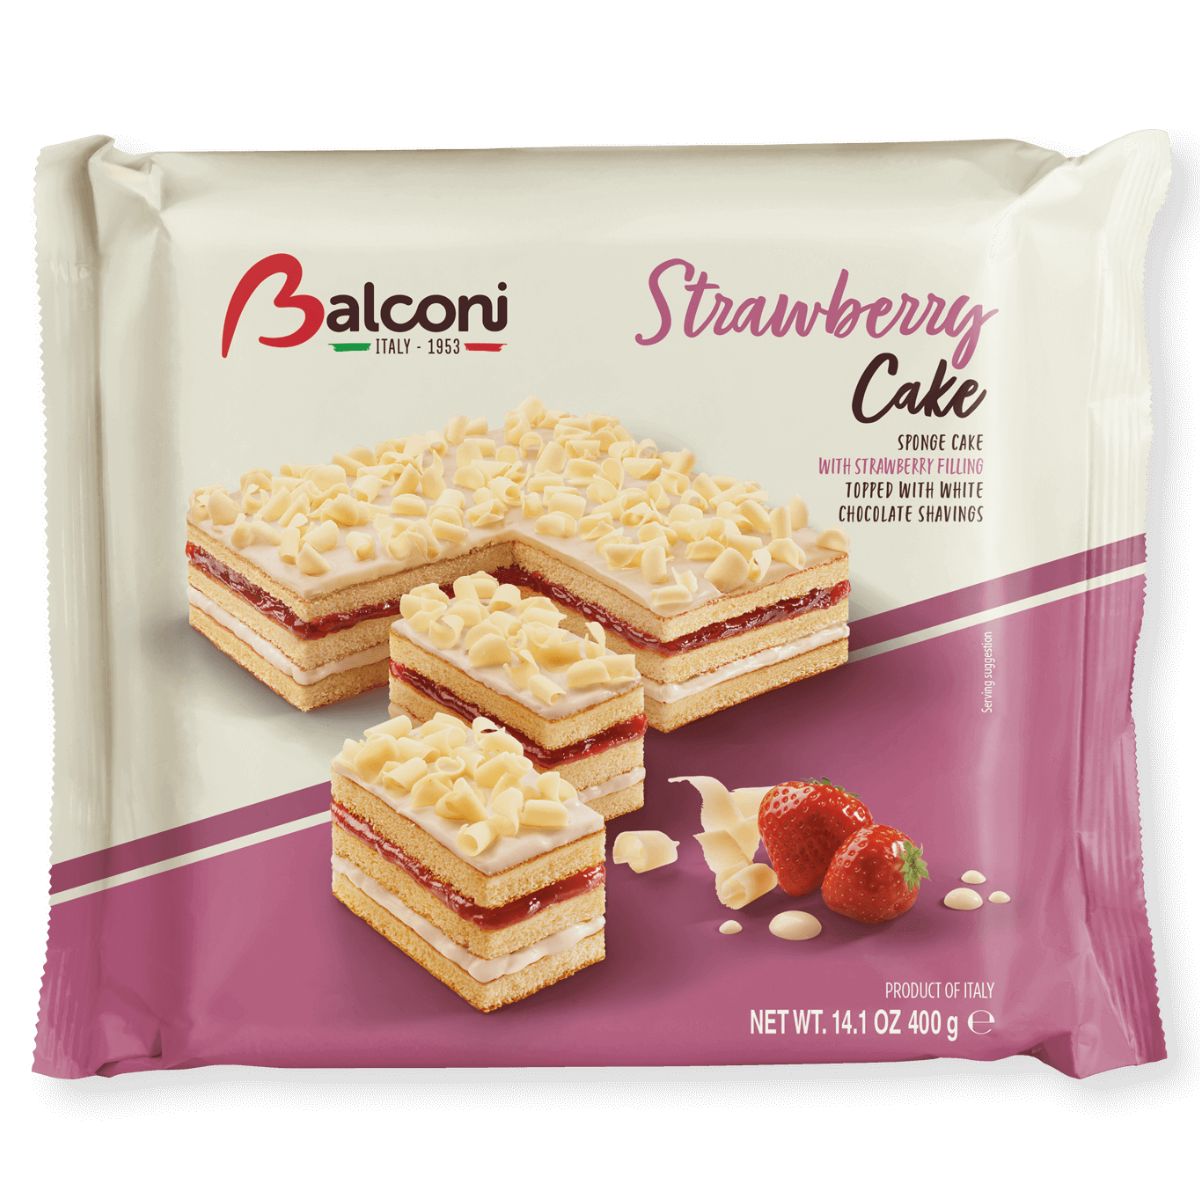 A bag of Balconi - Strawberry Cake - 400g on a white background.